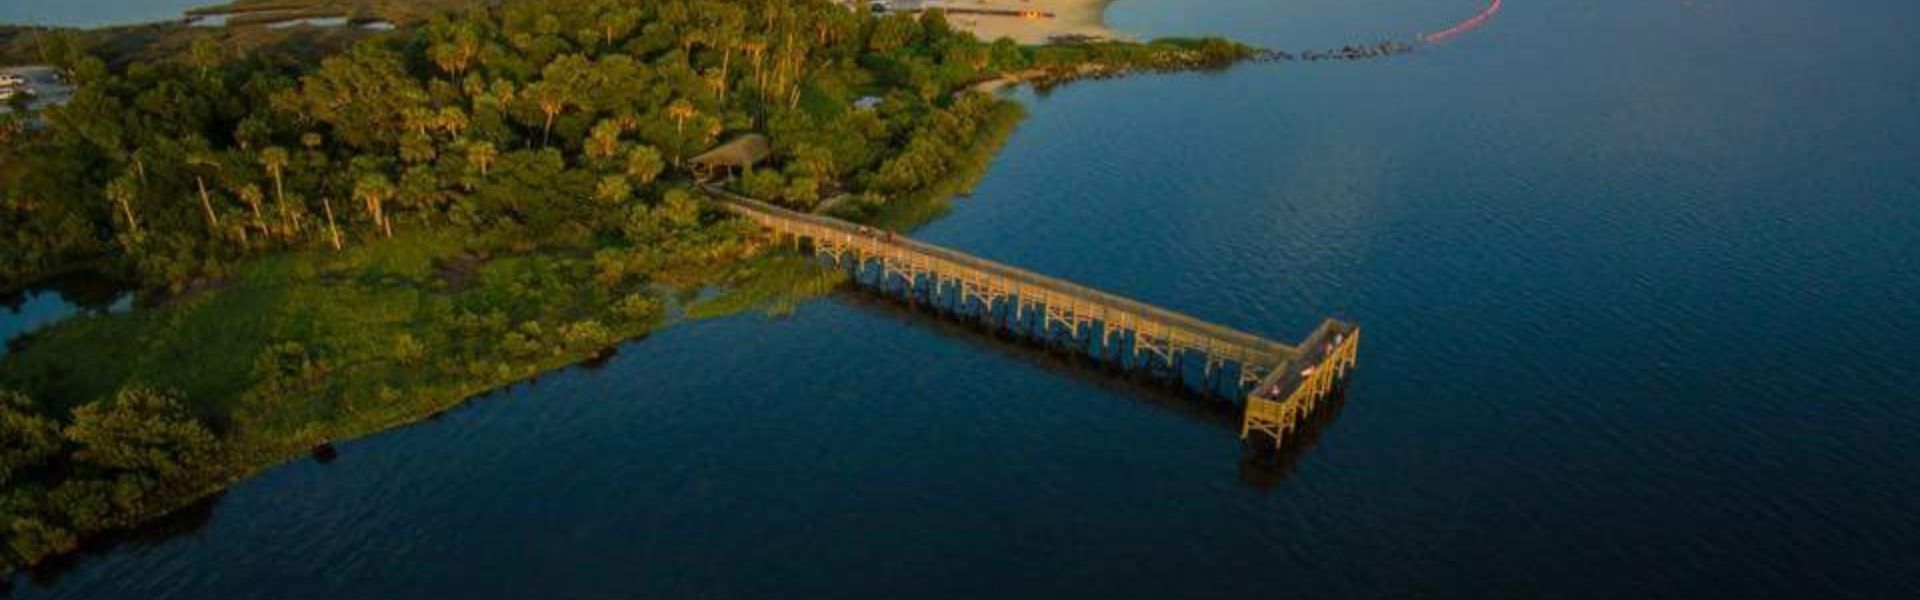 Fort Island Trail Pier and beach Discover Crystal River Campaign scrolling banner 28Dec22